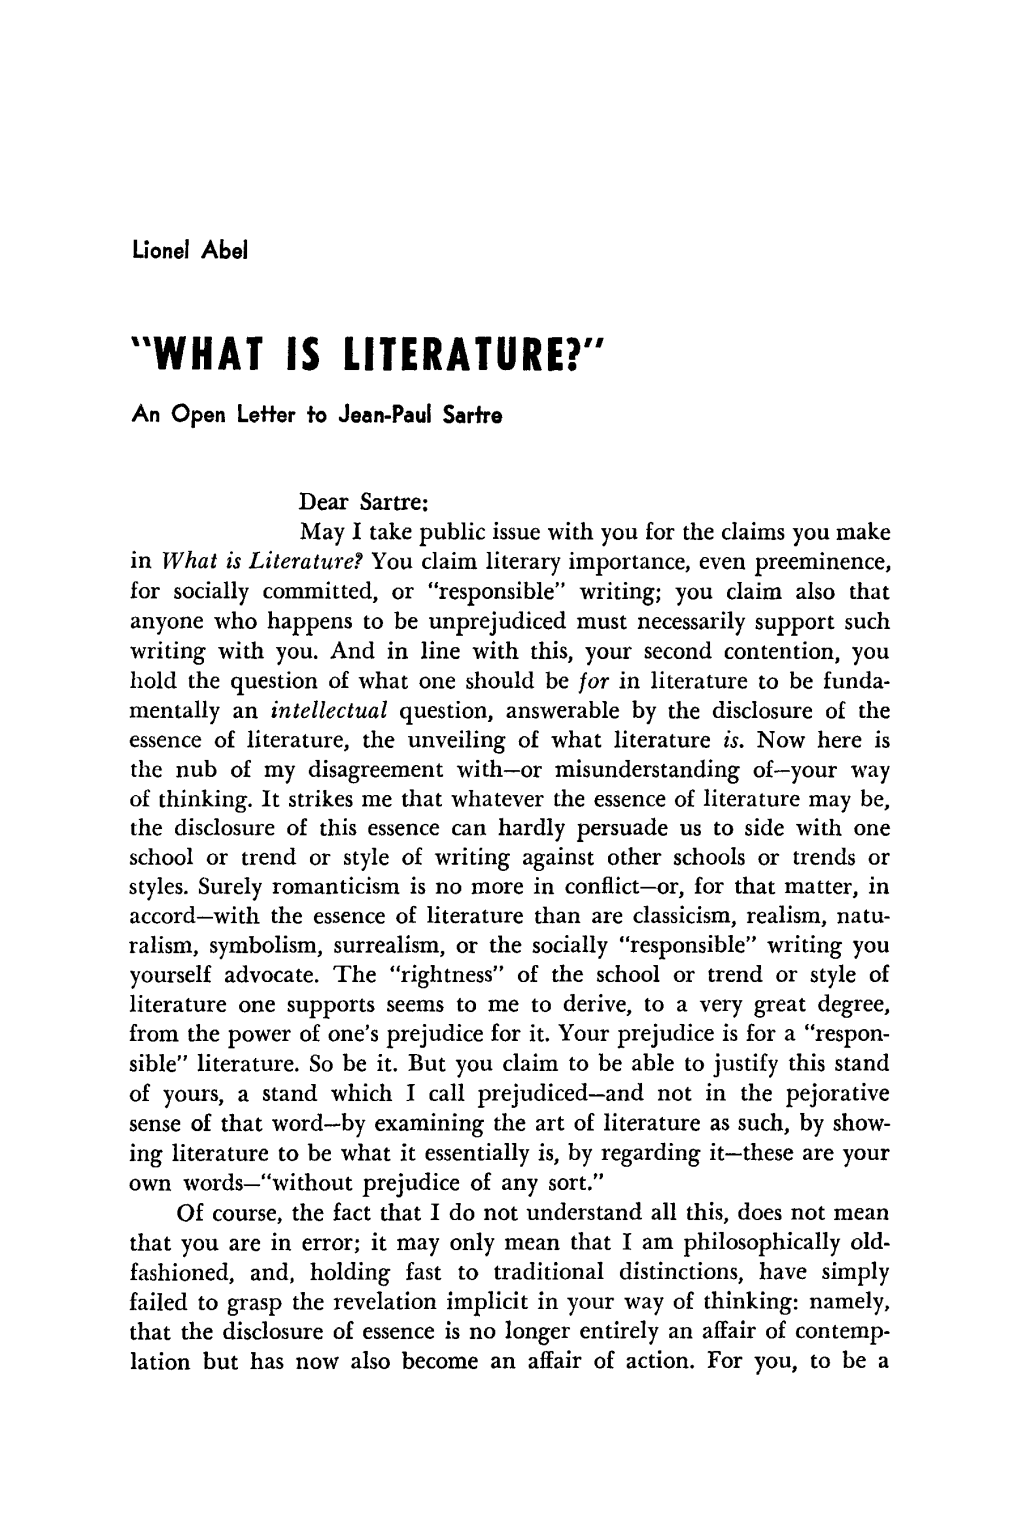 "What Is Literature?"